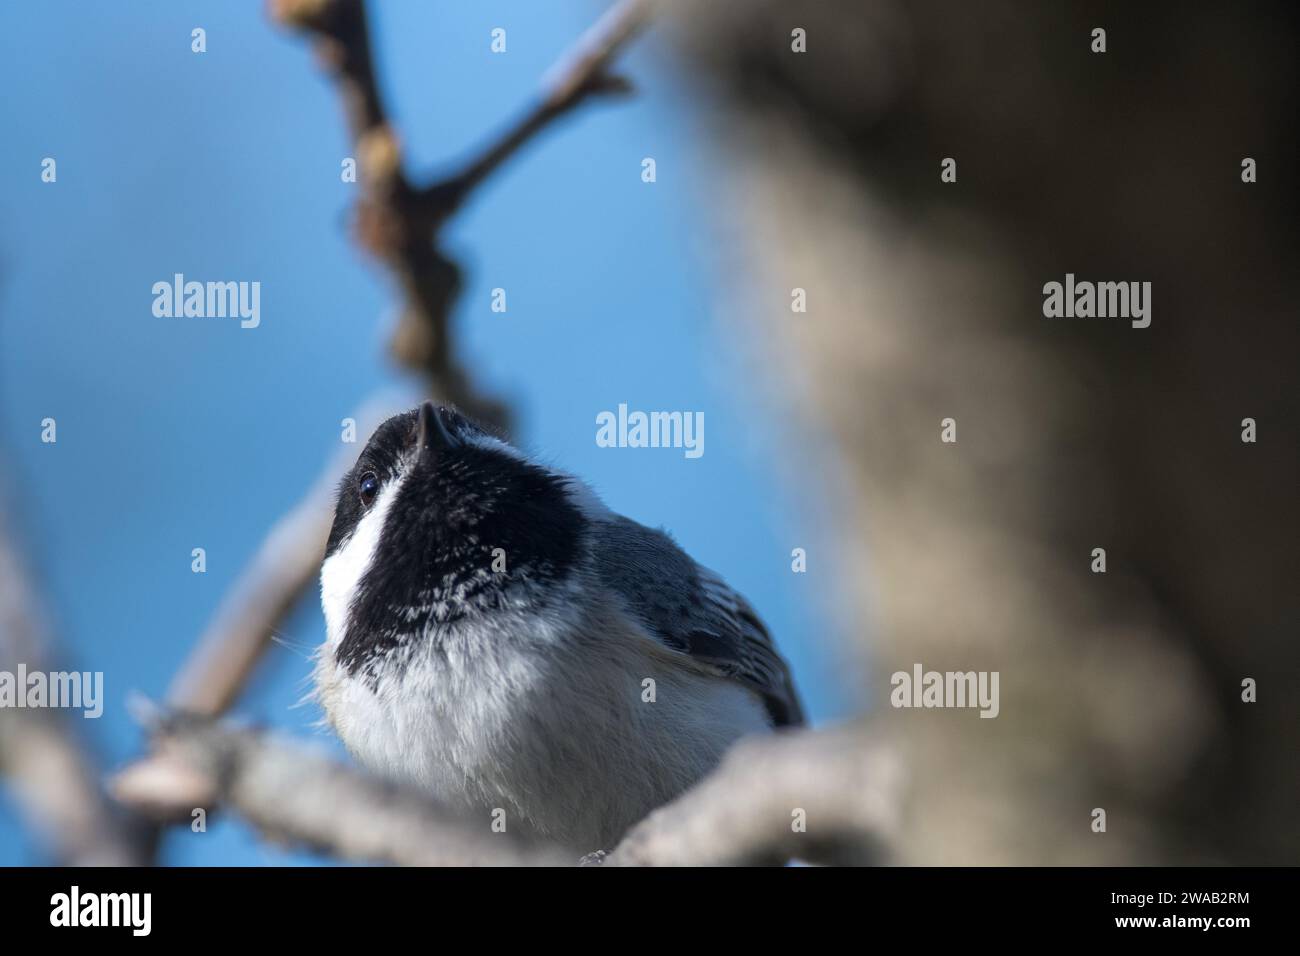 Black-capped Chickadee close up on a branch Stock Photo